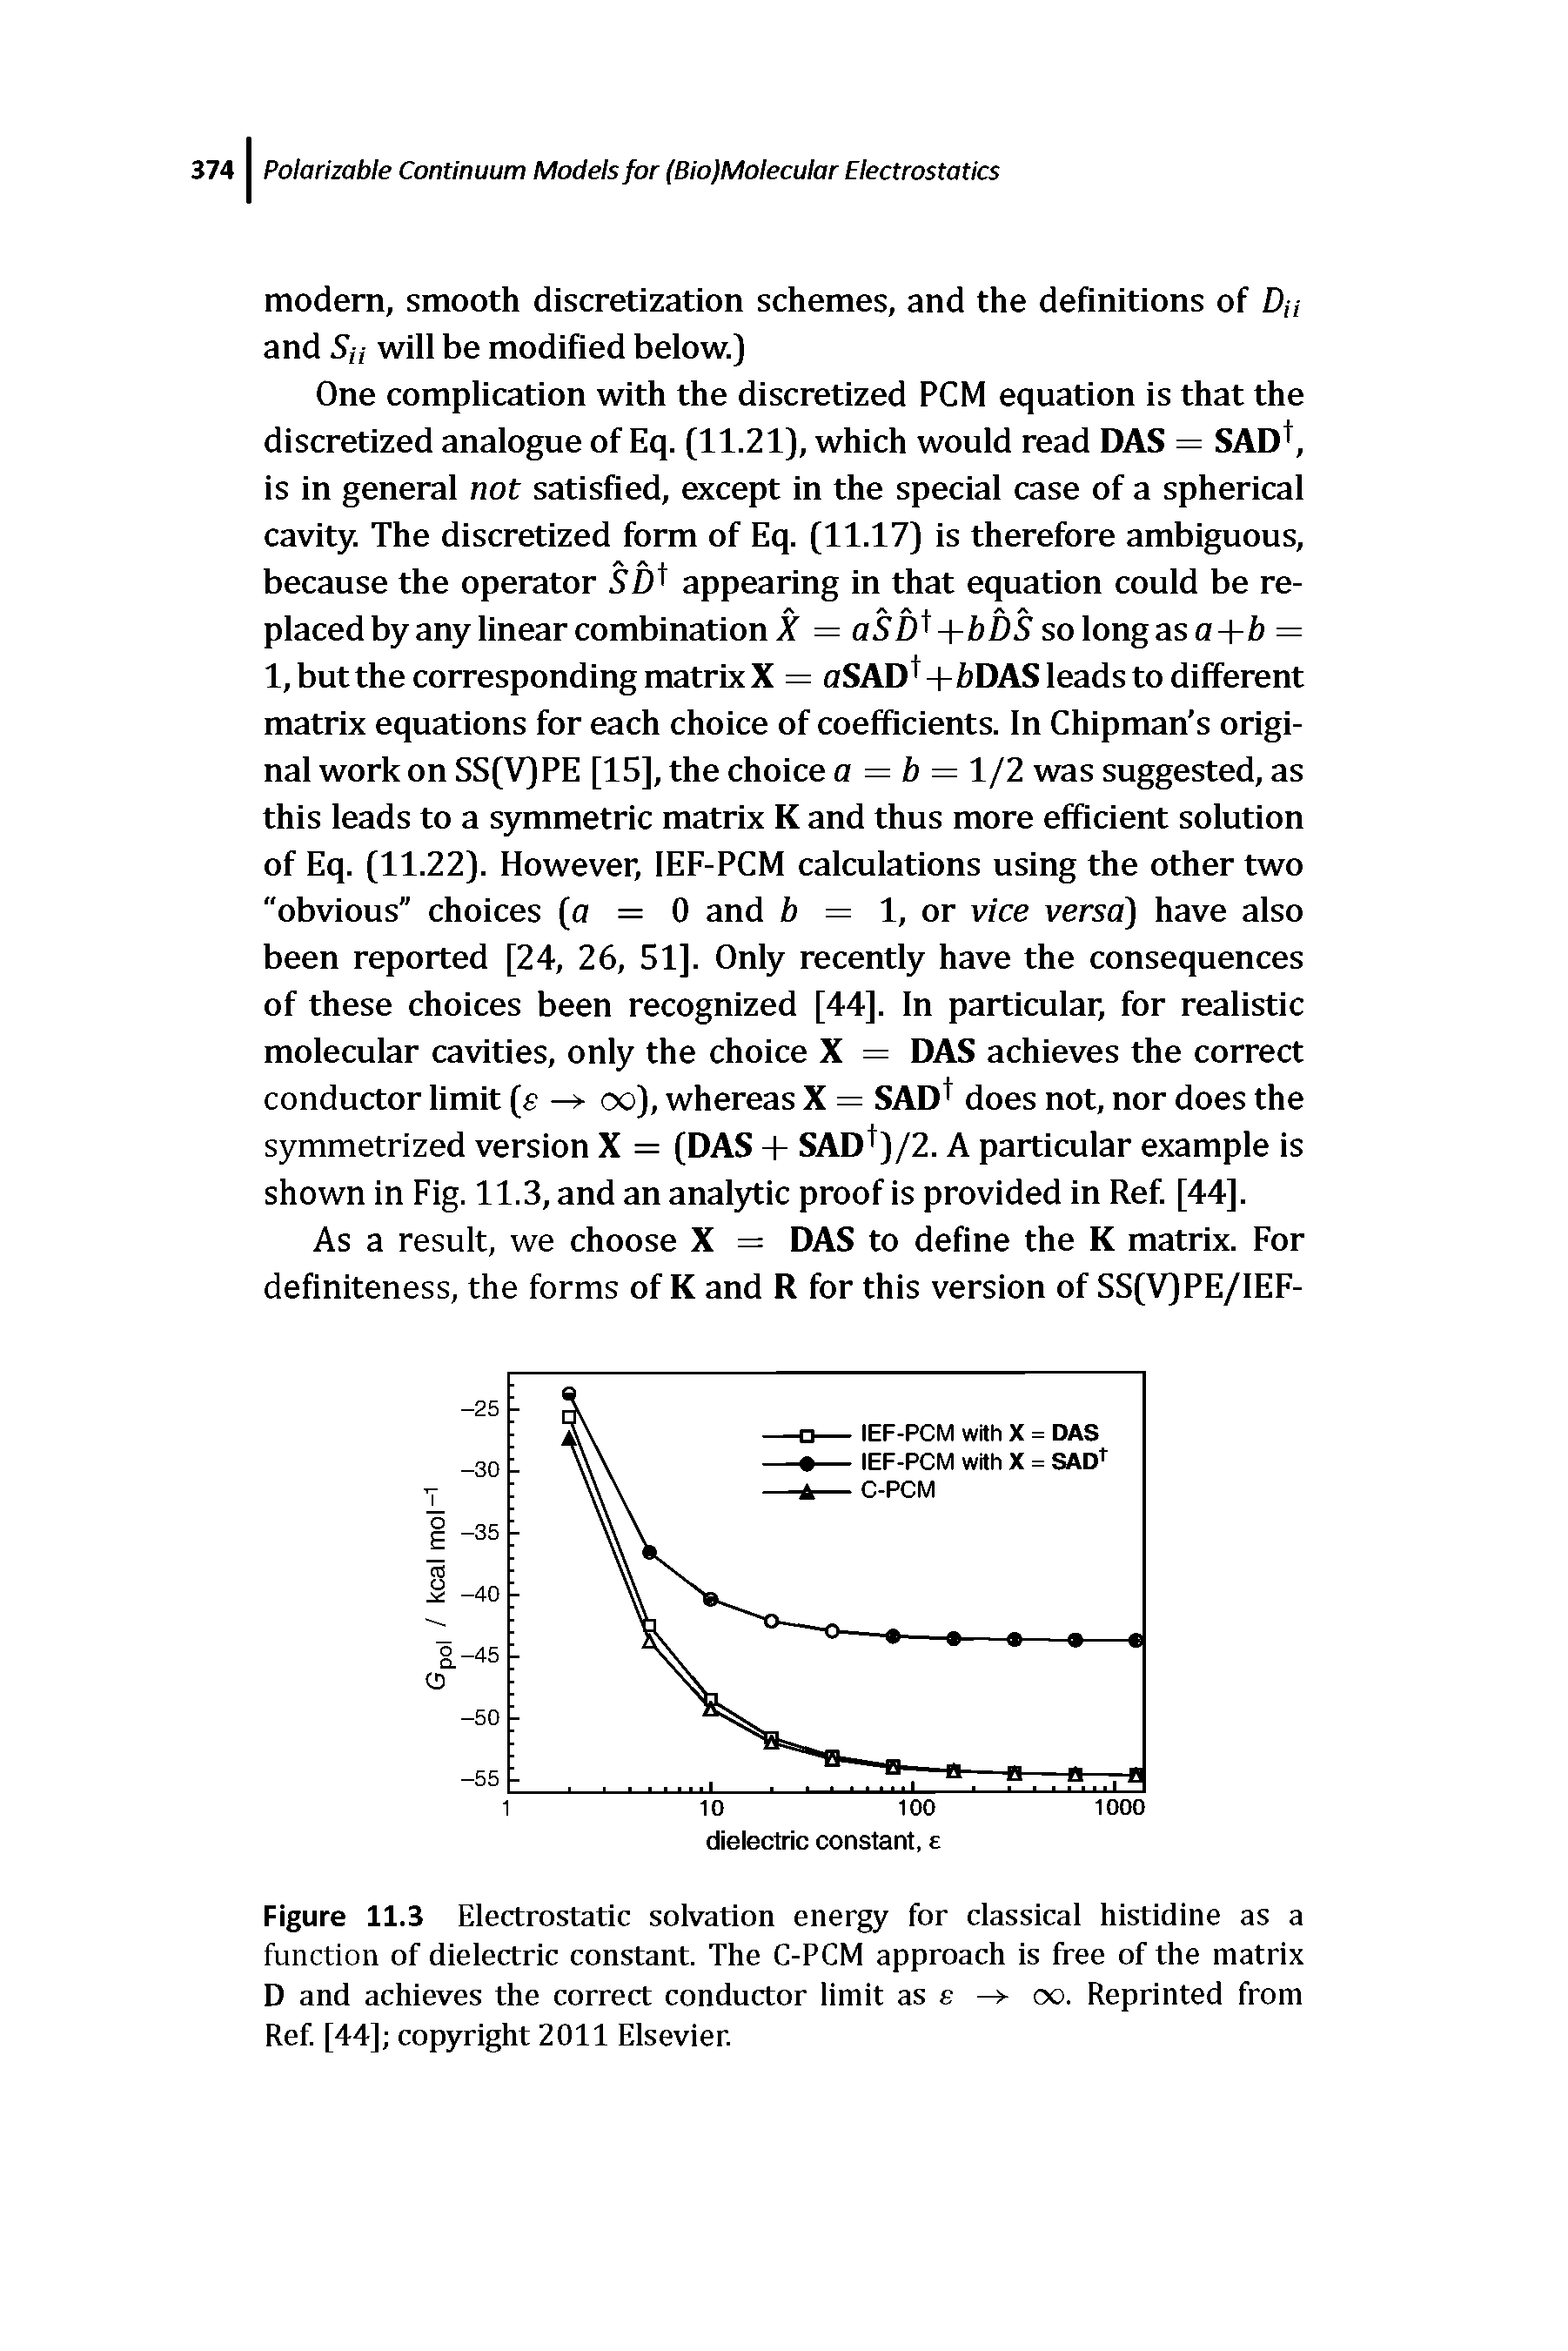 Figure 11.3 Electrostatic solvation energy for classical histidine as a function of dielectric constant. The C-PCM approach is free of the matrix D and achieves the correct conductor limit as e -> oo. Reprinted from Ref [44] copyright 2011 Elsevier.